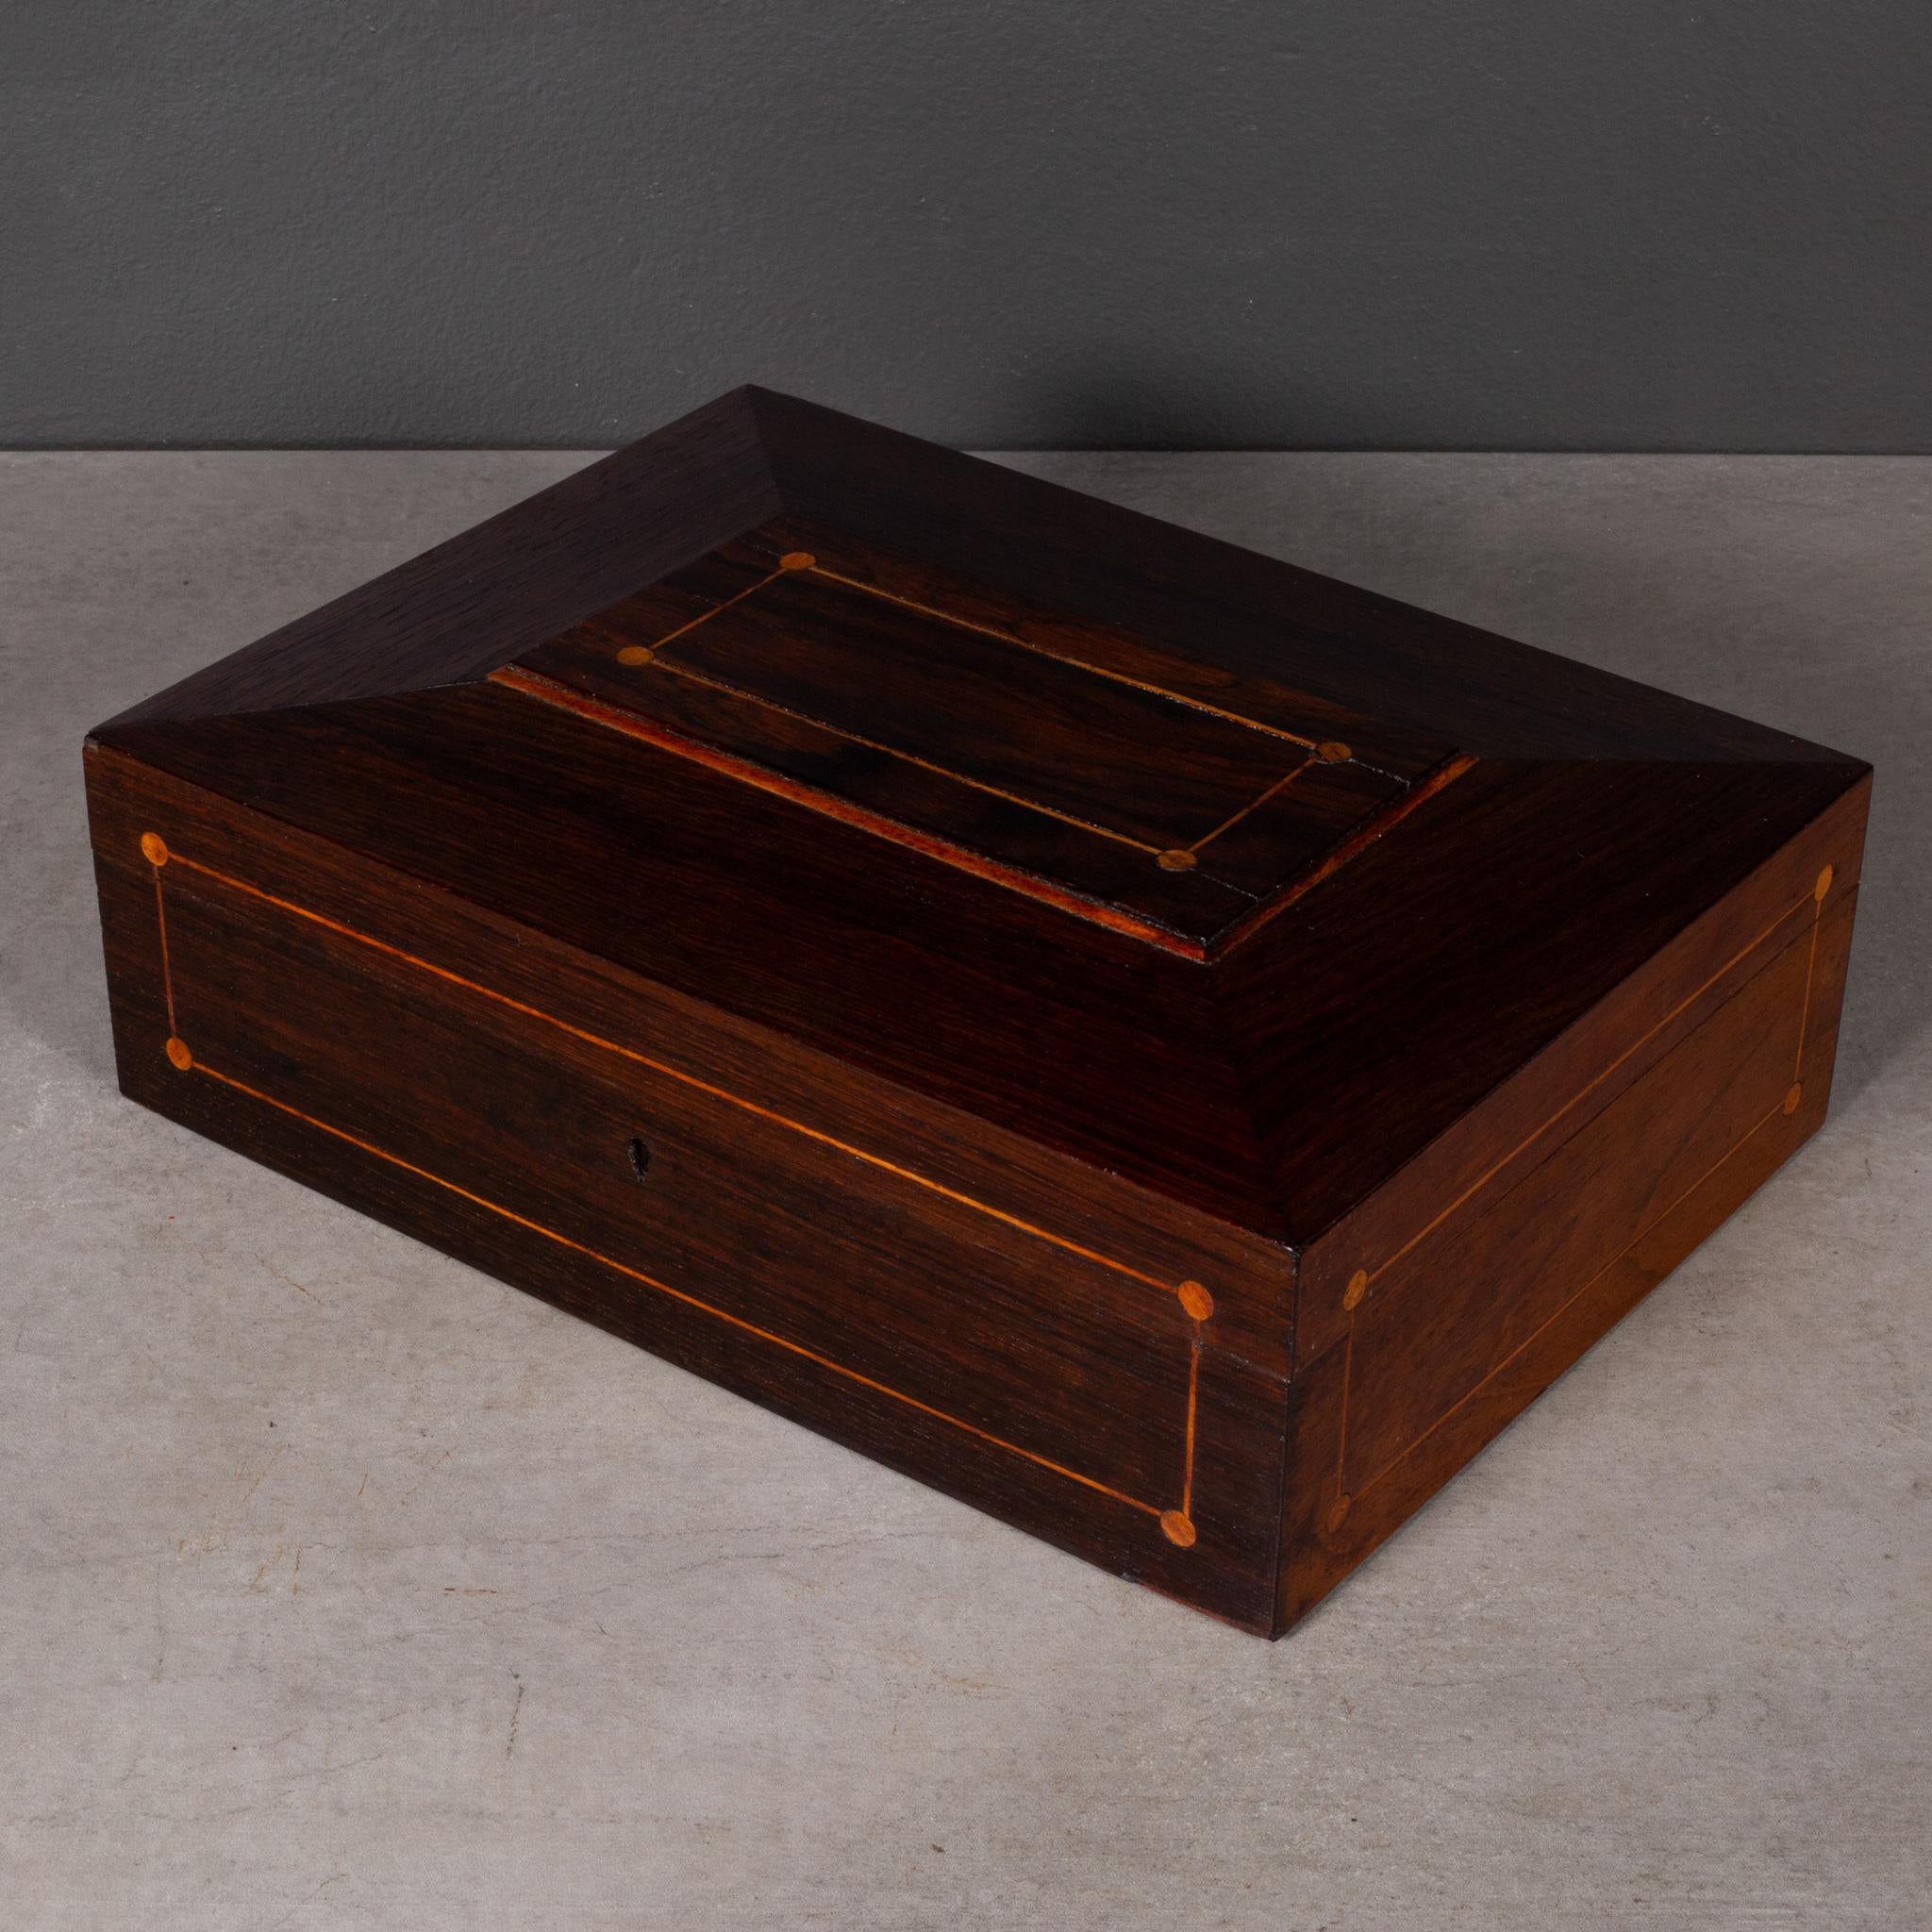 ABOUT

A 19th century Mahogany veneer Shaker sewing box with Maple inlay on the top and sides.

    CREATOR Shaker community.
    DATE OF MANUFACTURE c.1800s.
    MATERIALS AND TECHNIQUES Mahogany Veneer, Maple Inlay.
    CONDITION Good. Wear